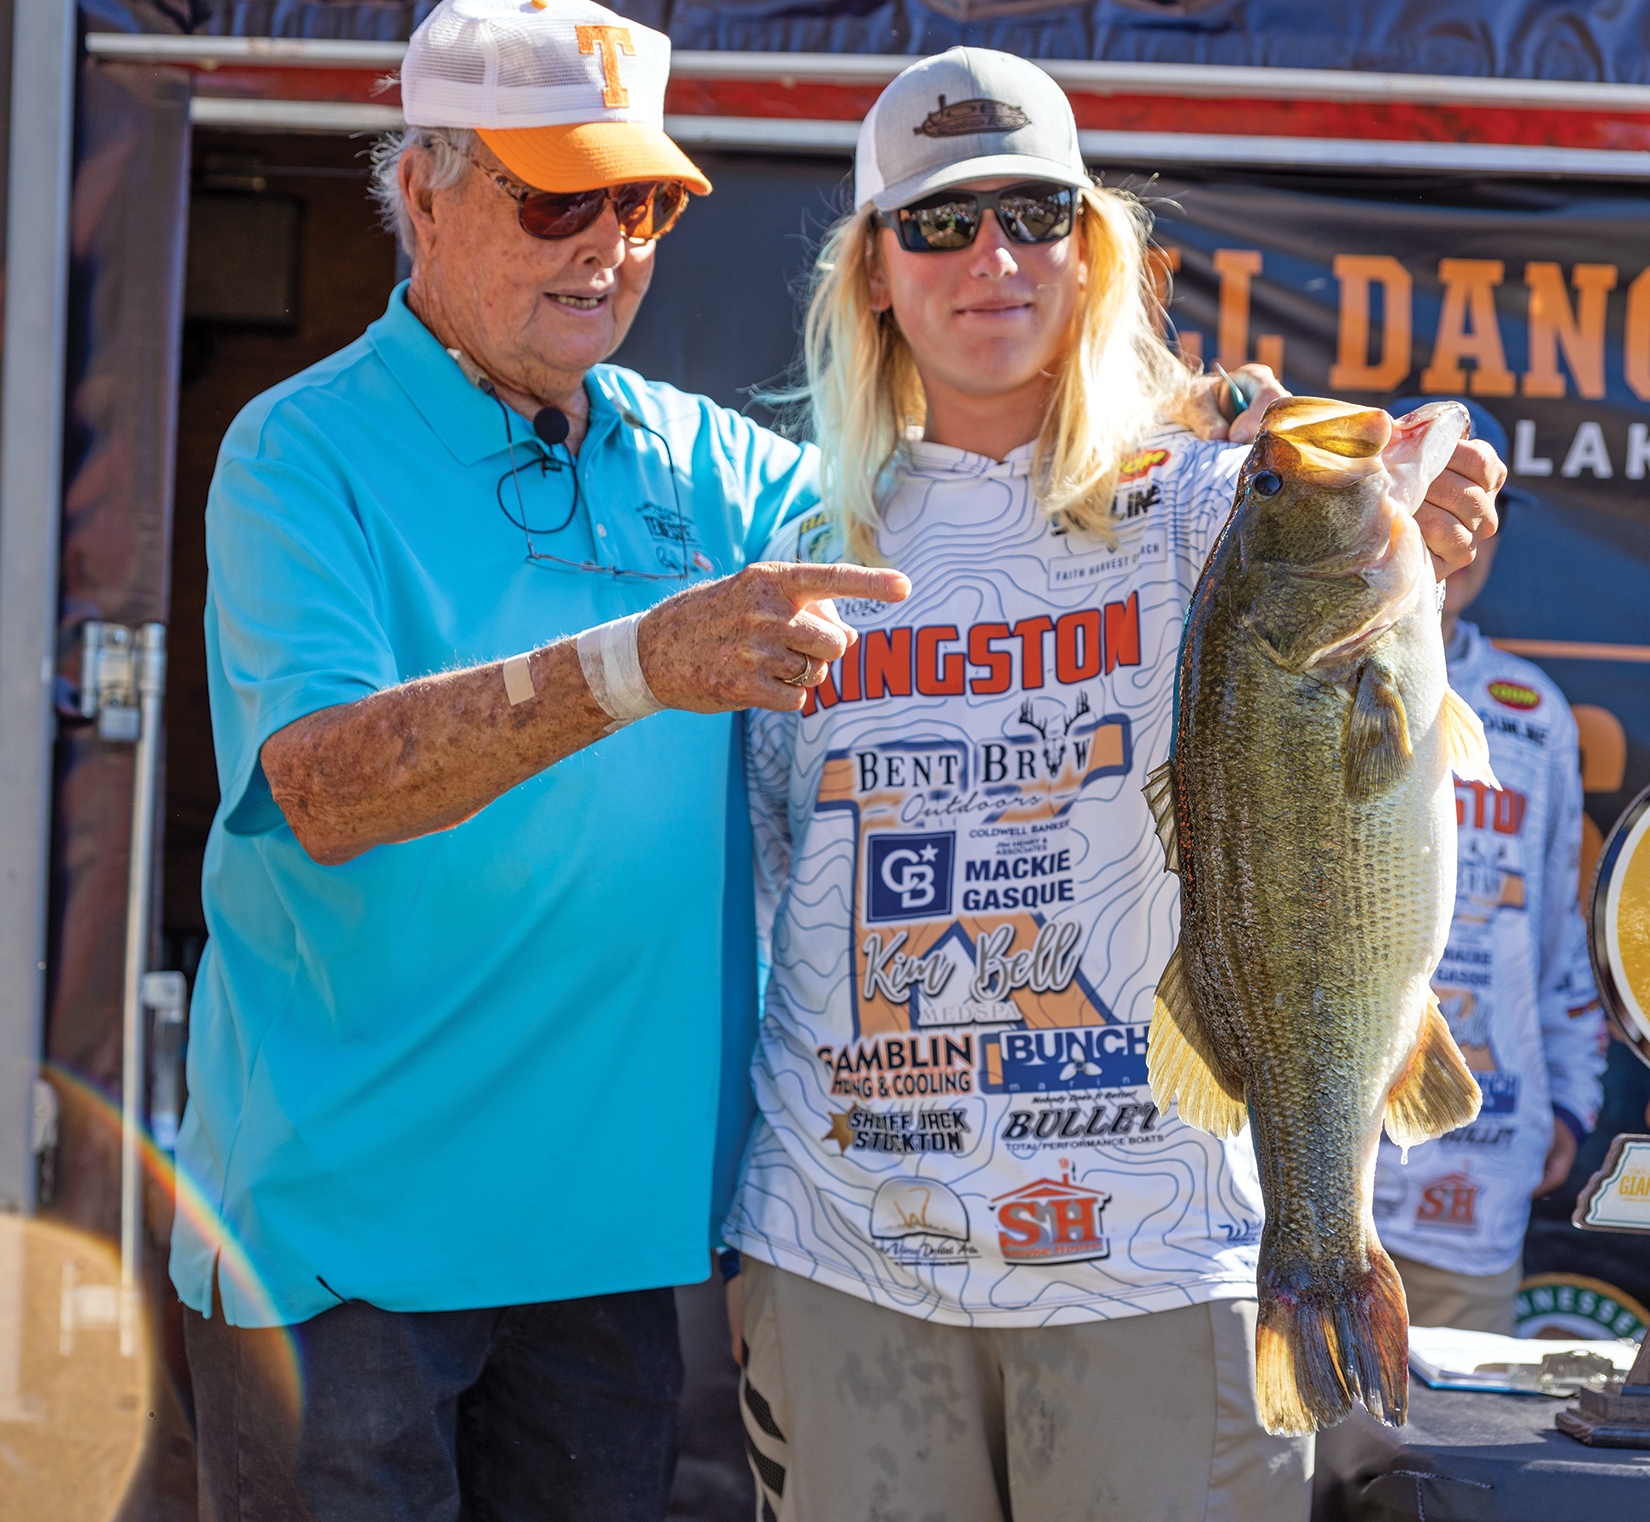 WESLEY STRADER: Countdown to the 2020 Bass Pro Tour Opener 3, 2, 1 -  Major League Fishing